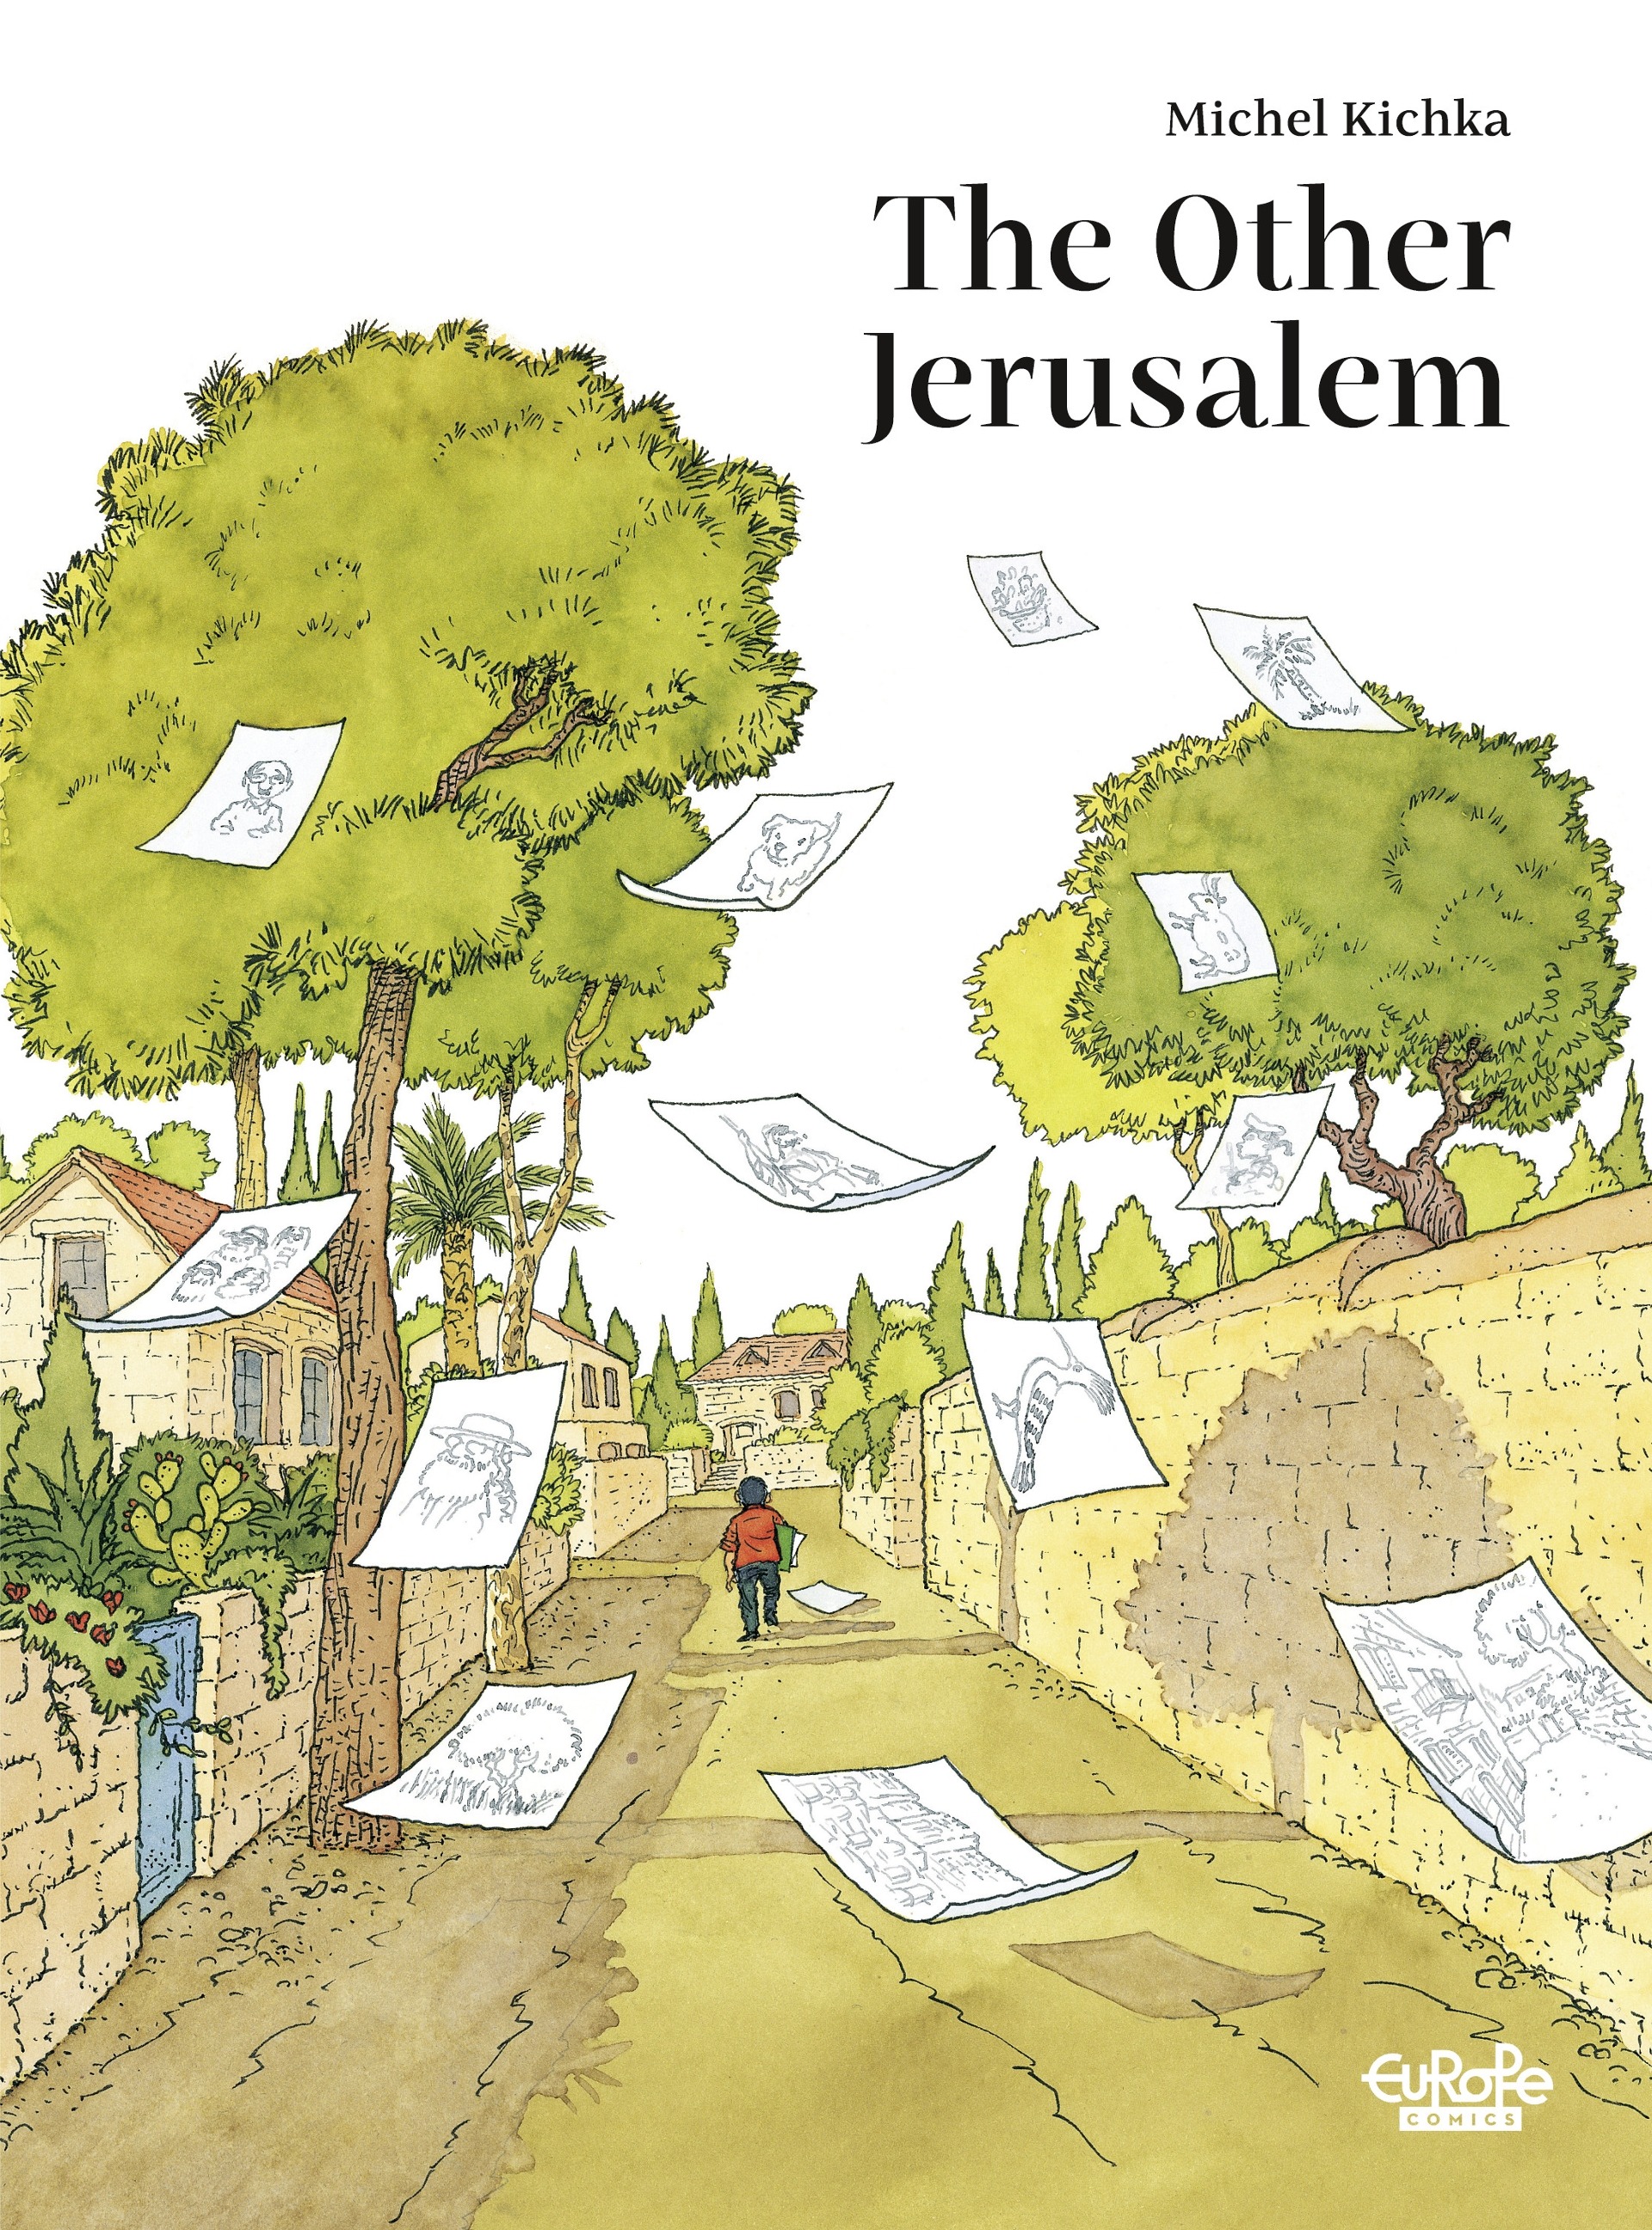 Read online The Other Jerusalem comic -  Issue # TPB - 1